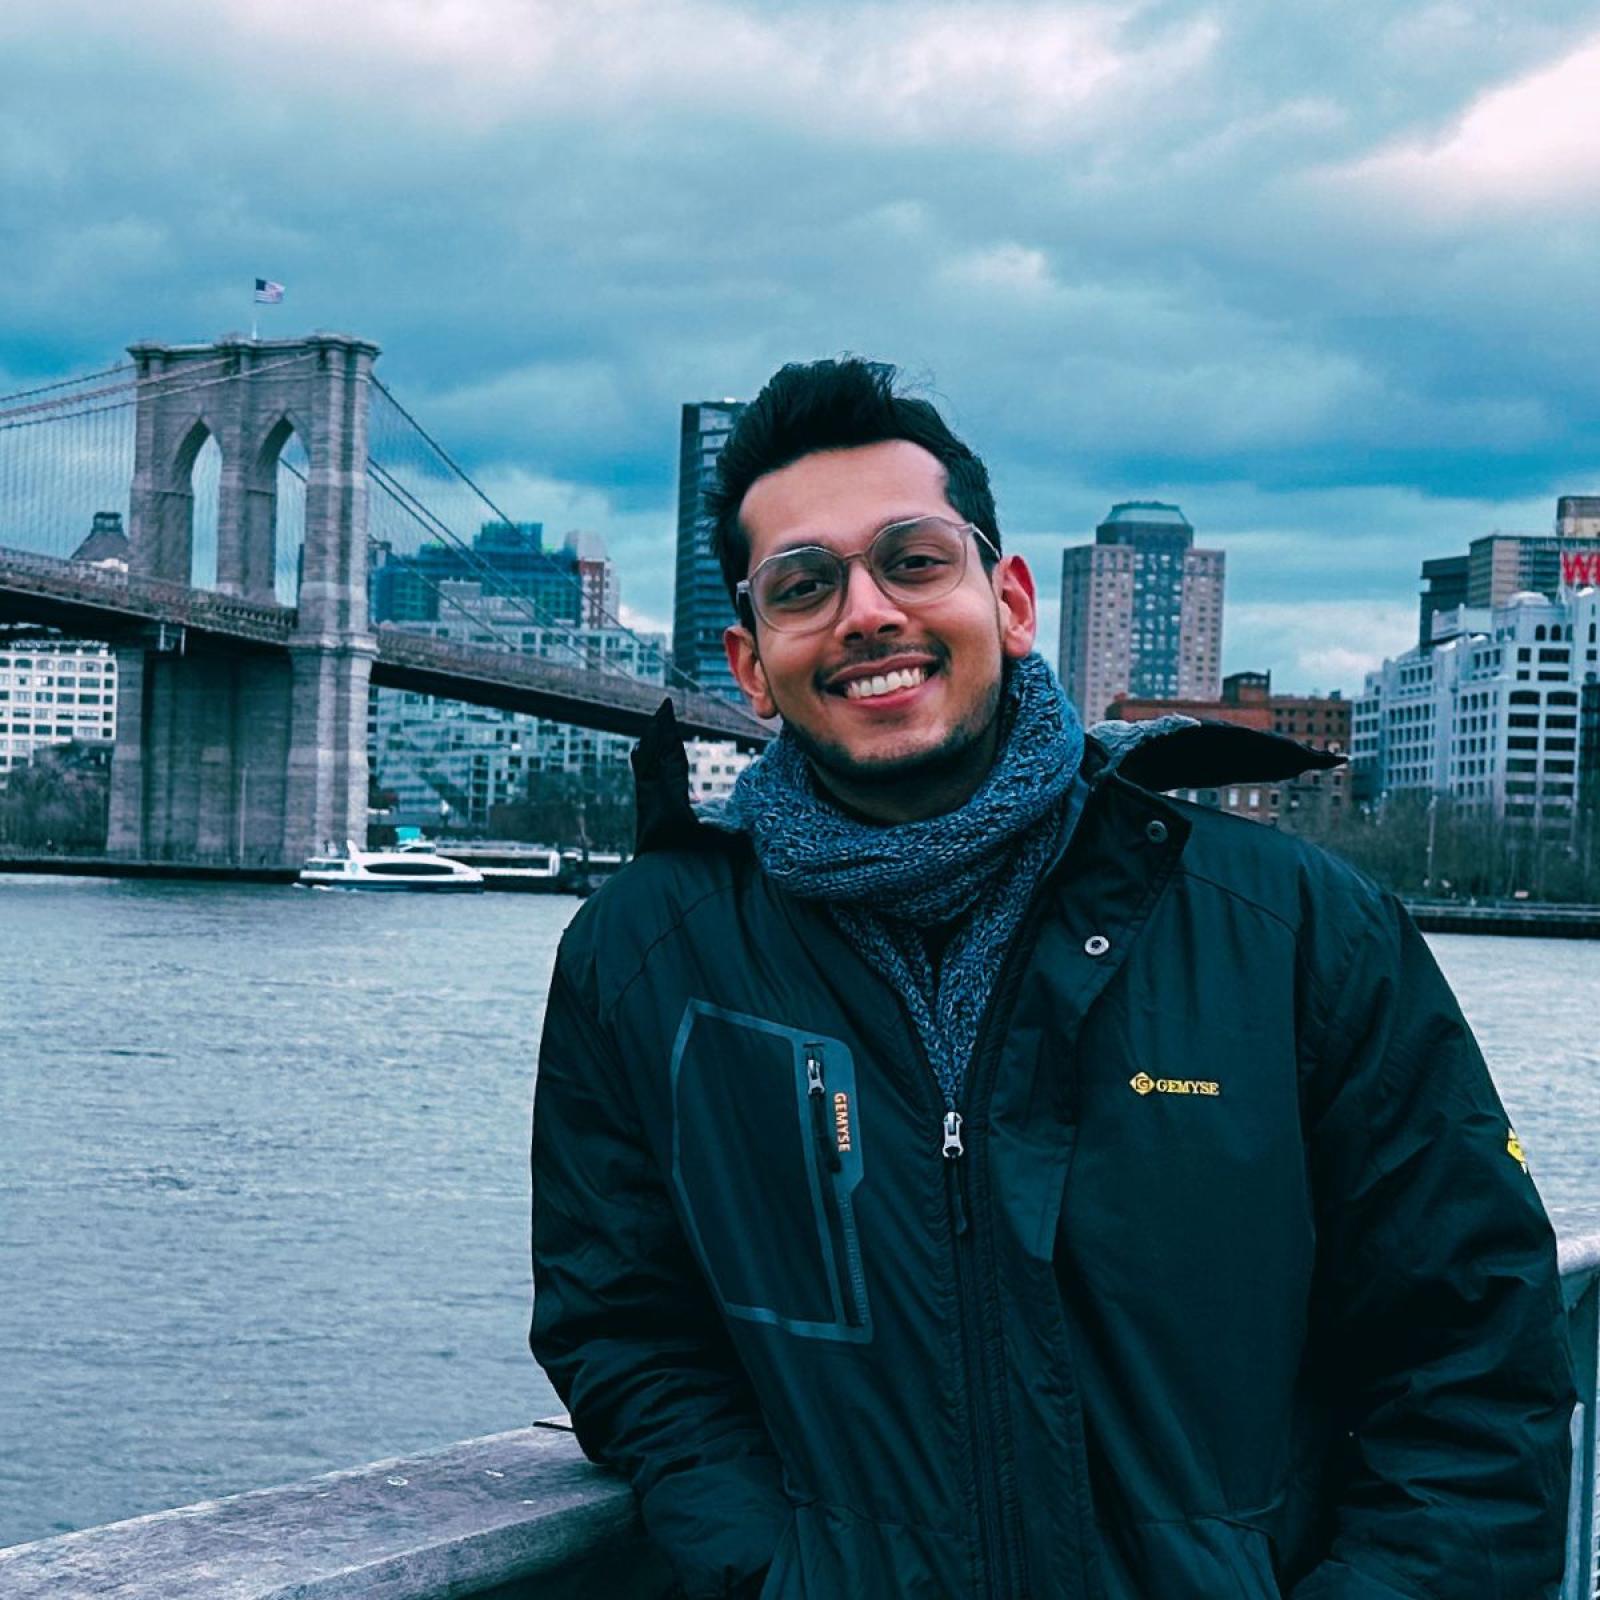 Image of Seidenberg student Nishant Doshi on a cloudy day with the Brooklyn Bridge in the background